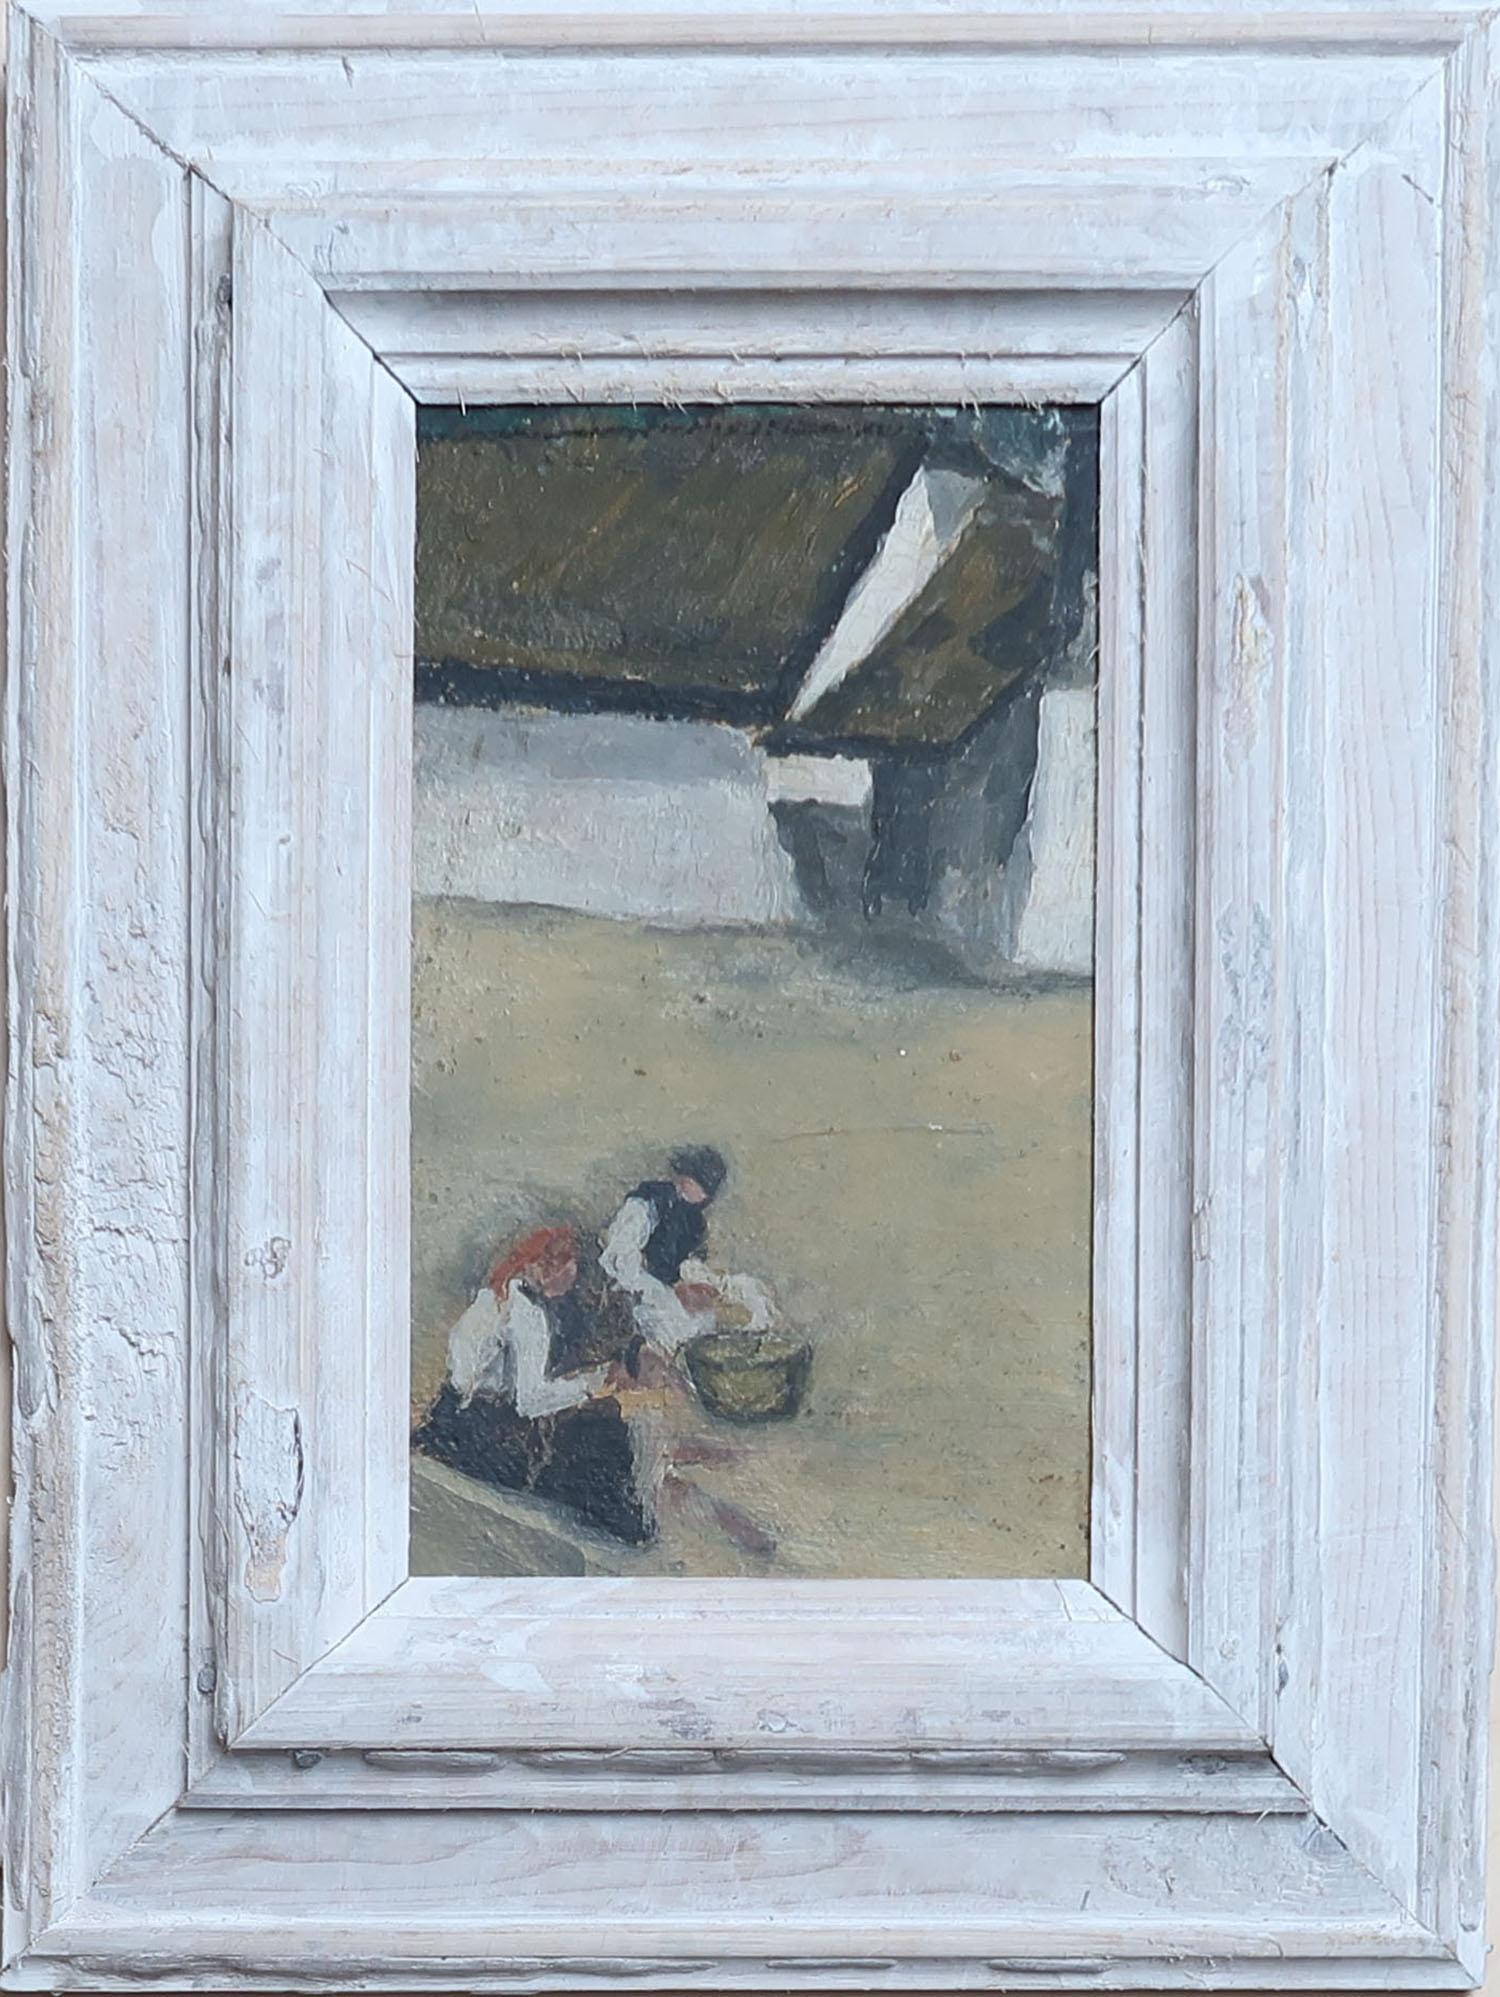 Charming painting of 2 female farm labourers

Unsigned. In the style of Jack Kampmann

Oil on board.

Possibly Faroe Islands

Presented in an antique white painted frame

The measurement below is the frame size.